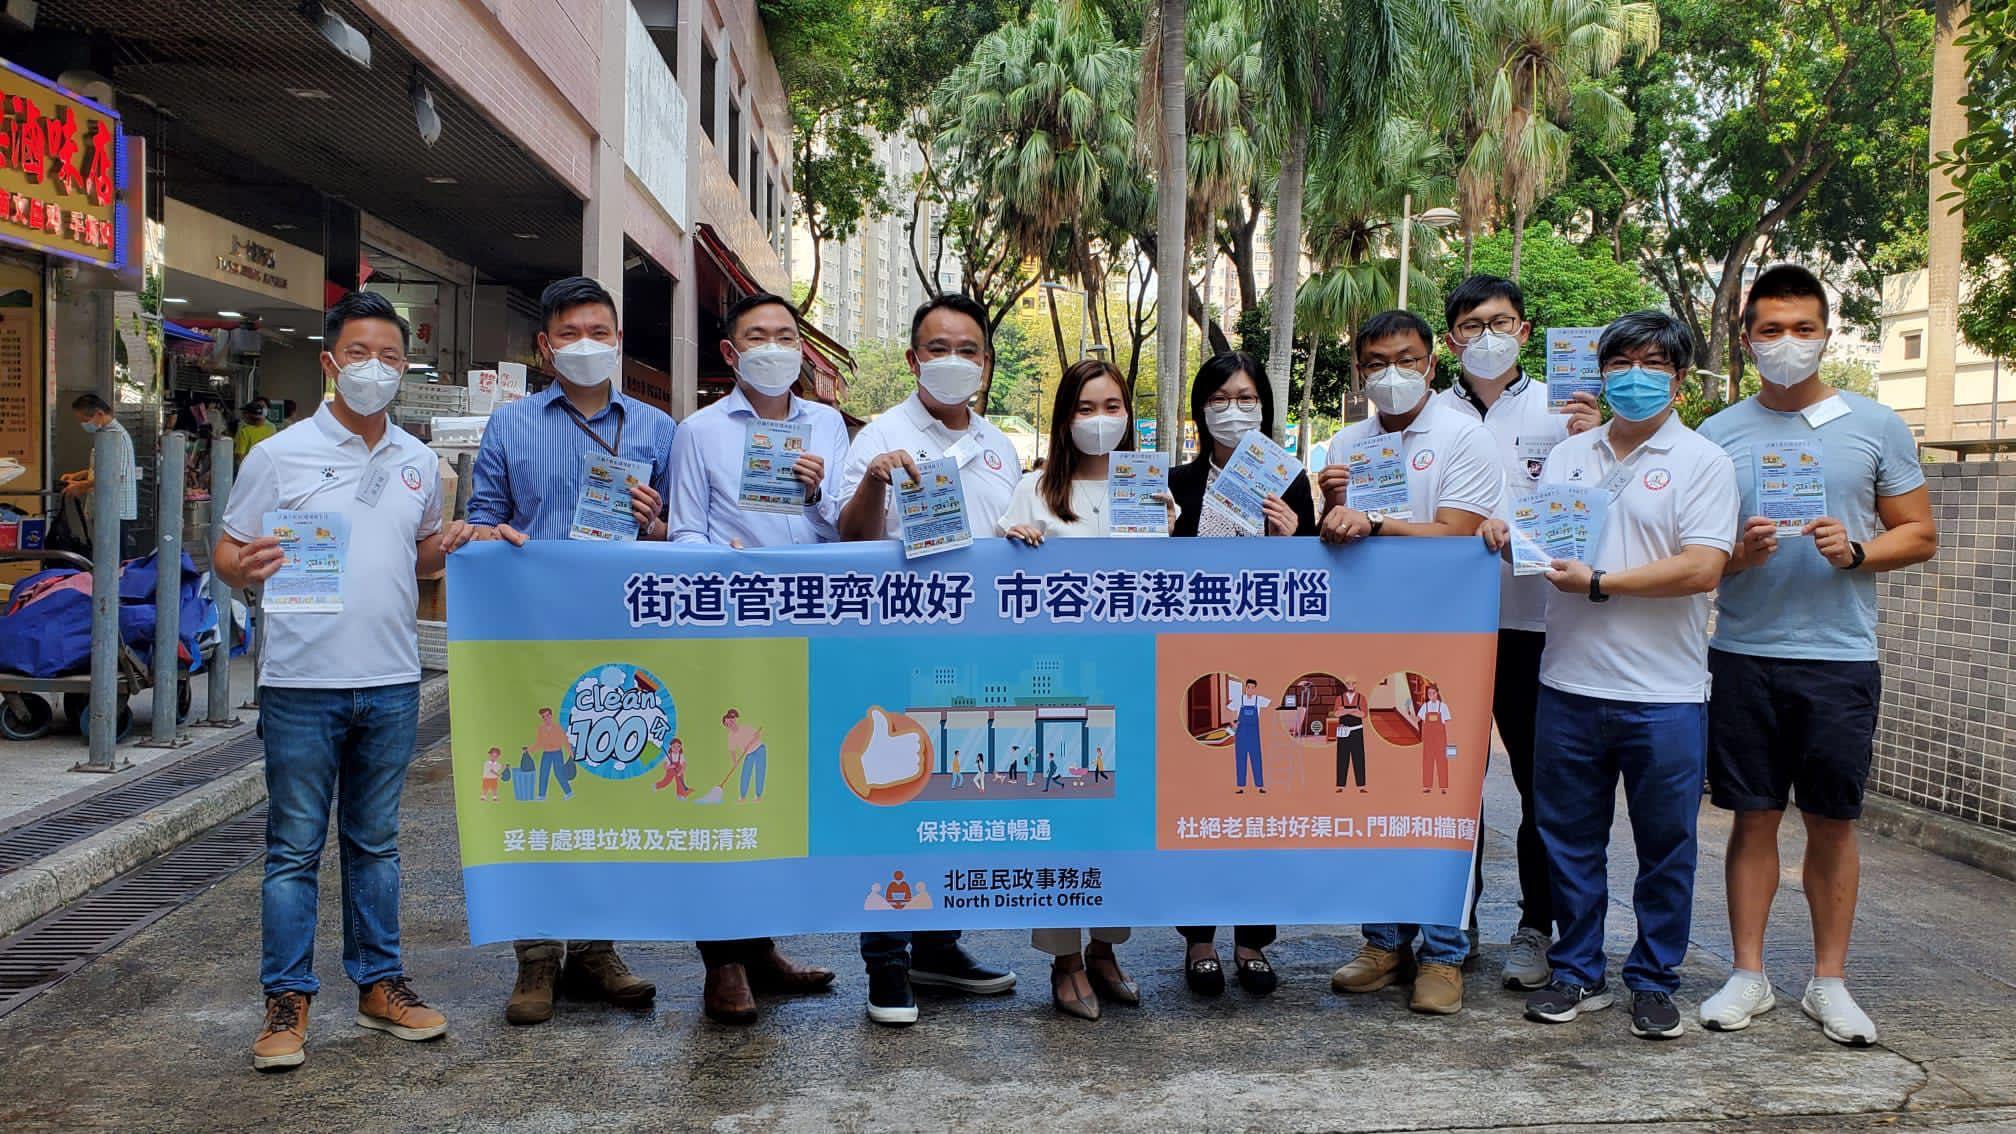 The Home Affairs Department and its District Offices conducted a series of cleaning works, publicity and educational activities during July and August to support the Government Programme on Tackling Hygiene Black Spots launched under the District Matters Co-ordination Task Force. Photo shows North District Office staff and members of the Fung Shui Area Committee conducting public education work relating to shop front extensions in Sheung Shui.